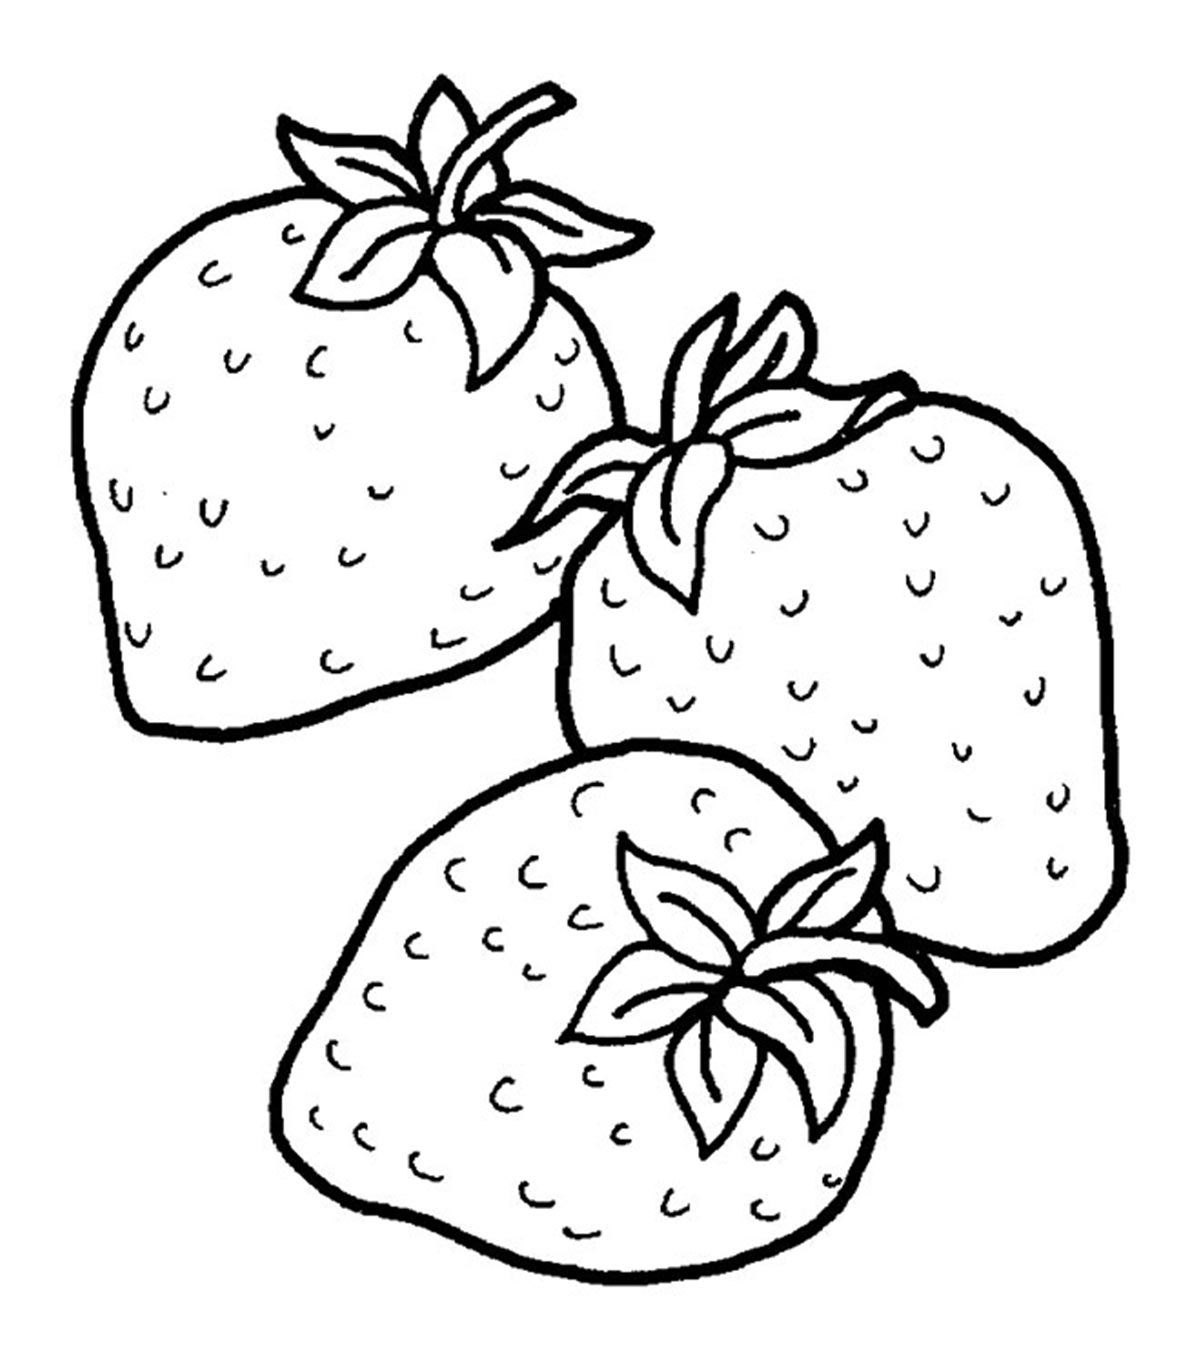 Fruits and Vegetables Coloring Pages - MomJunction